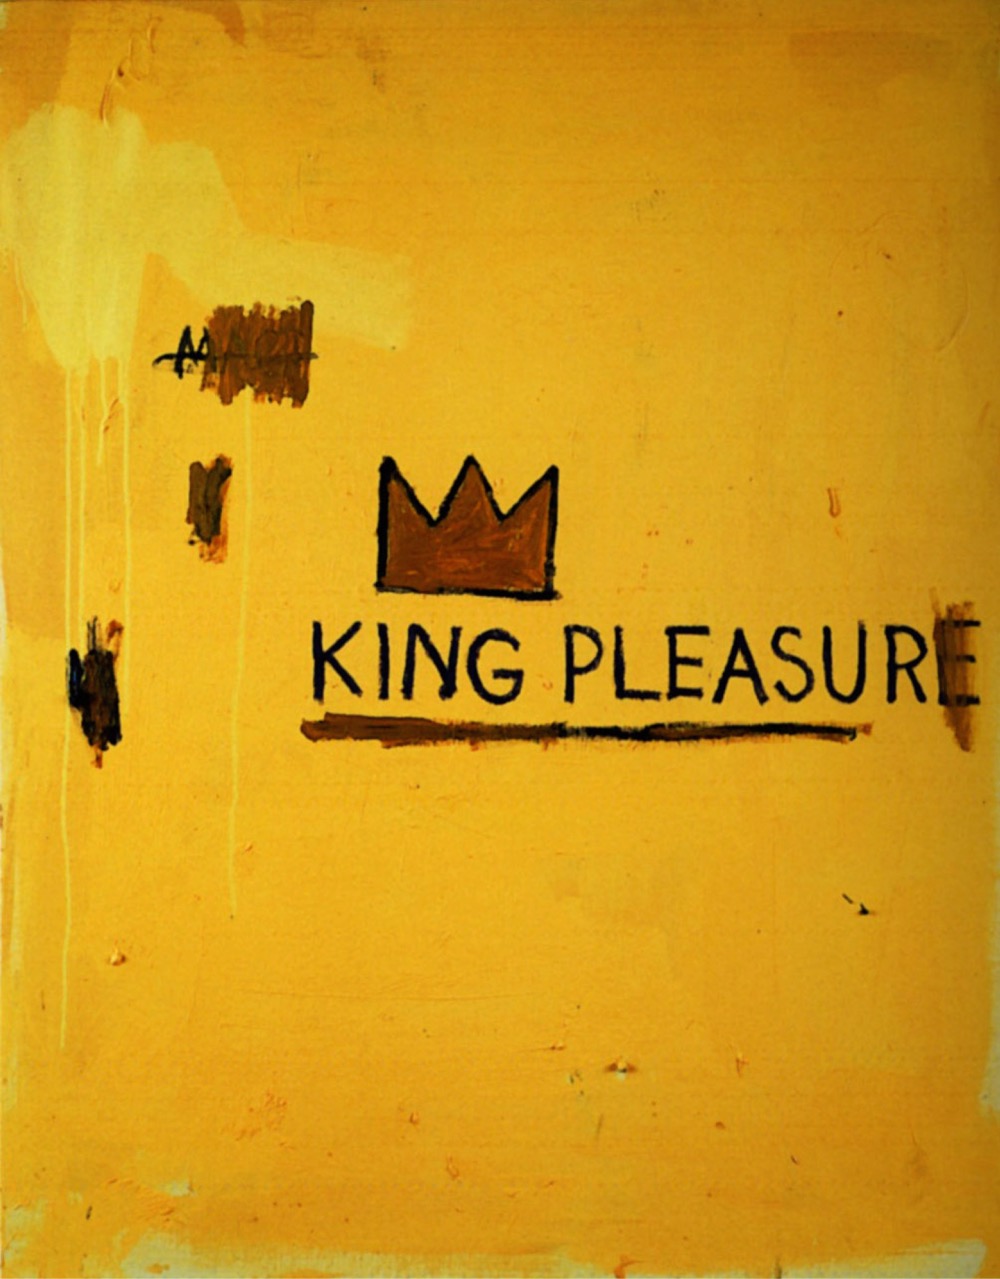 painting by Jean-Michel Basquiat with text that says 'King Pleasure'